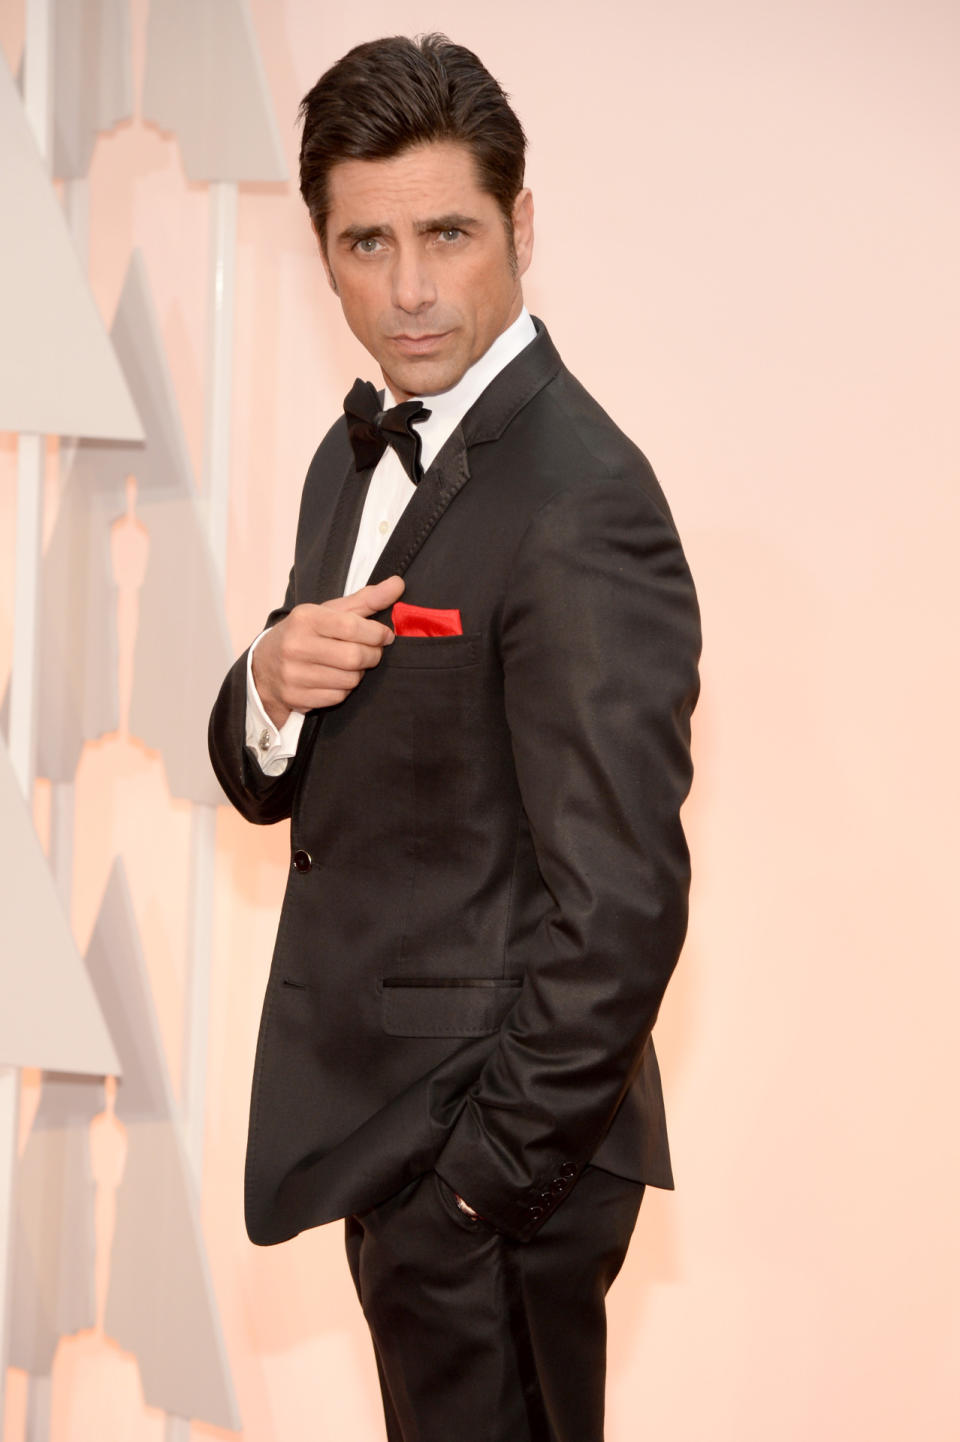 Love John Stamos but how did he nab an invite to the most exclusive Hollywood event of the year? Pretty sure he hasn’t been in anything award worthy since Full House.